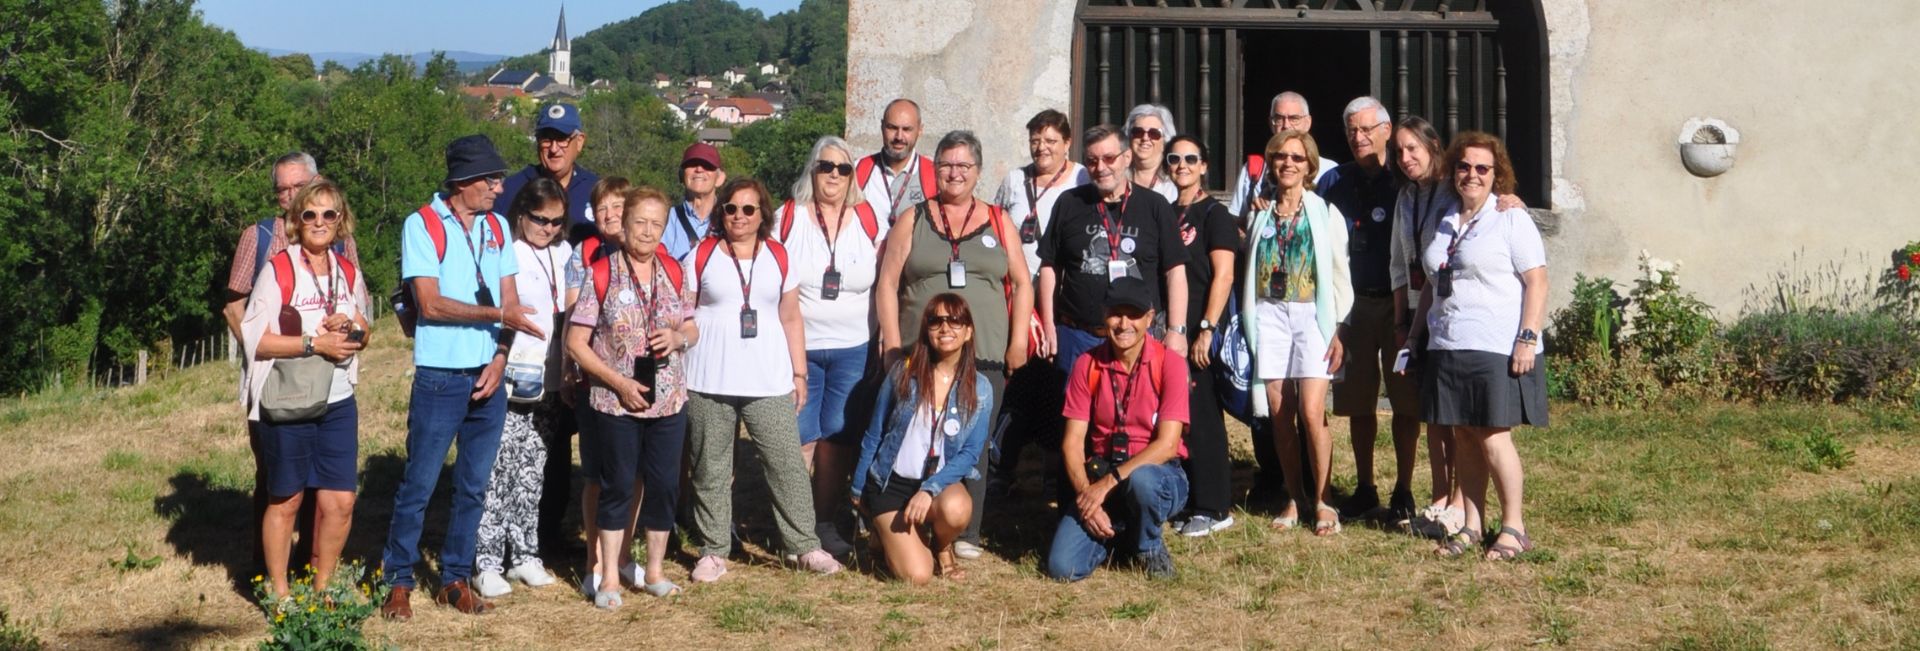 The Salesian Cooperators of the Iberian Region on a pilgrimage to Annecy